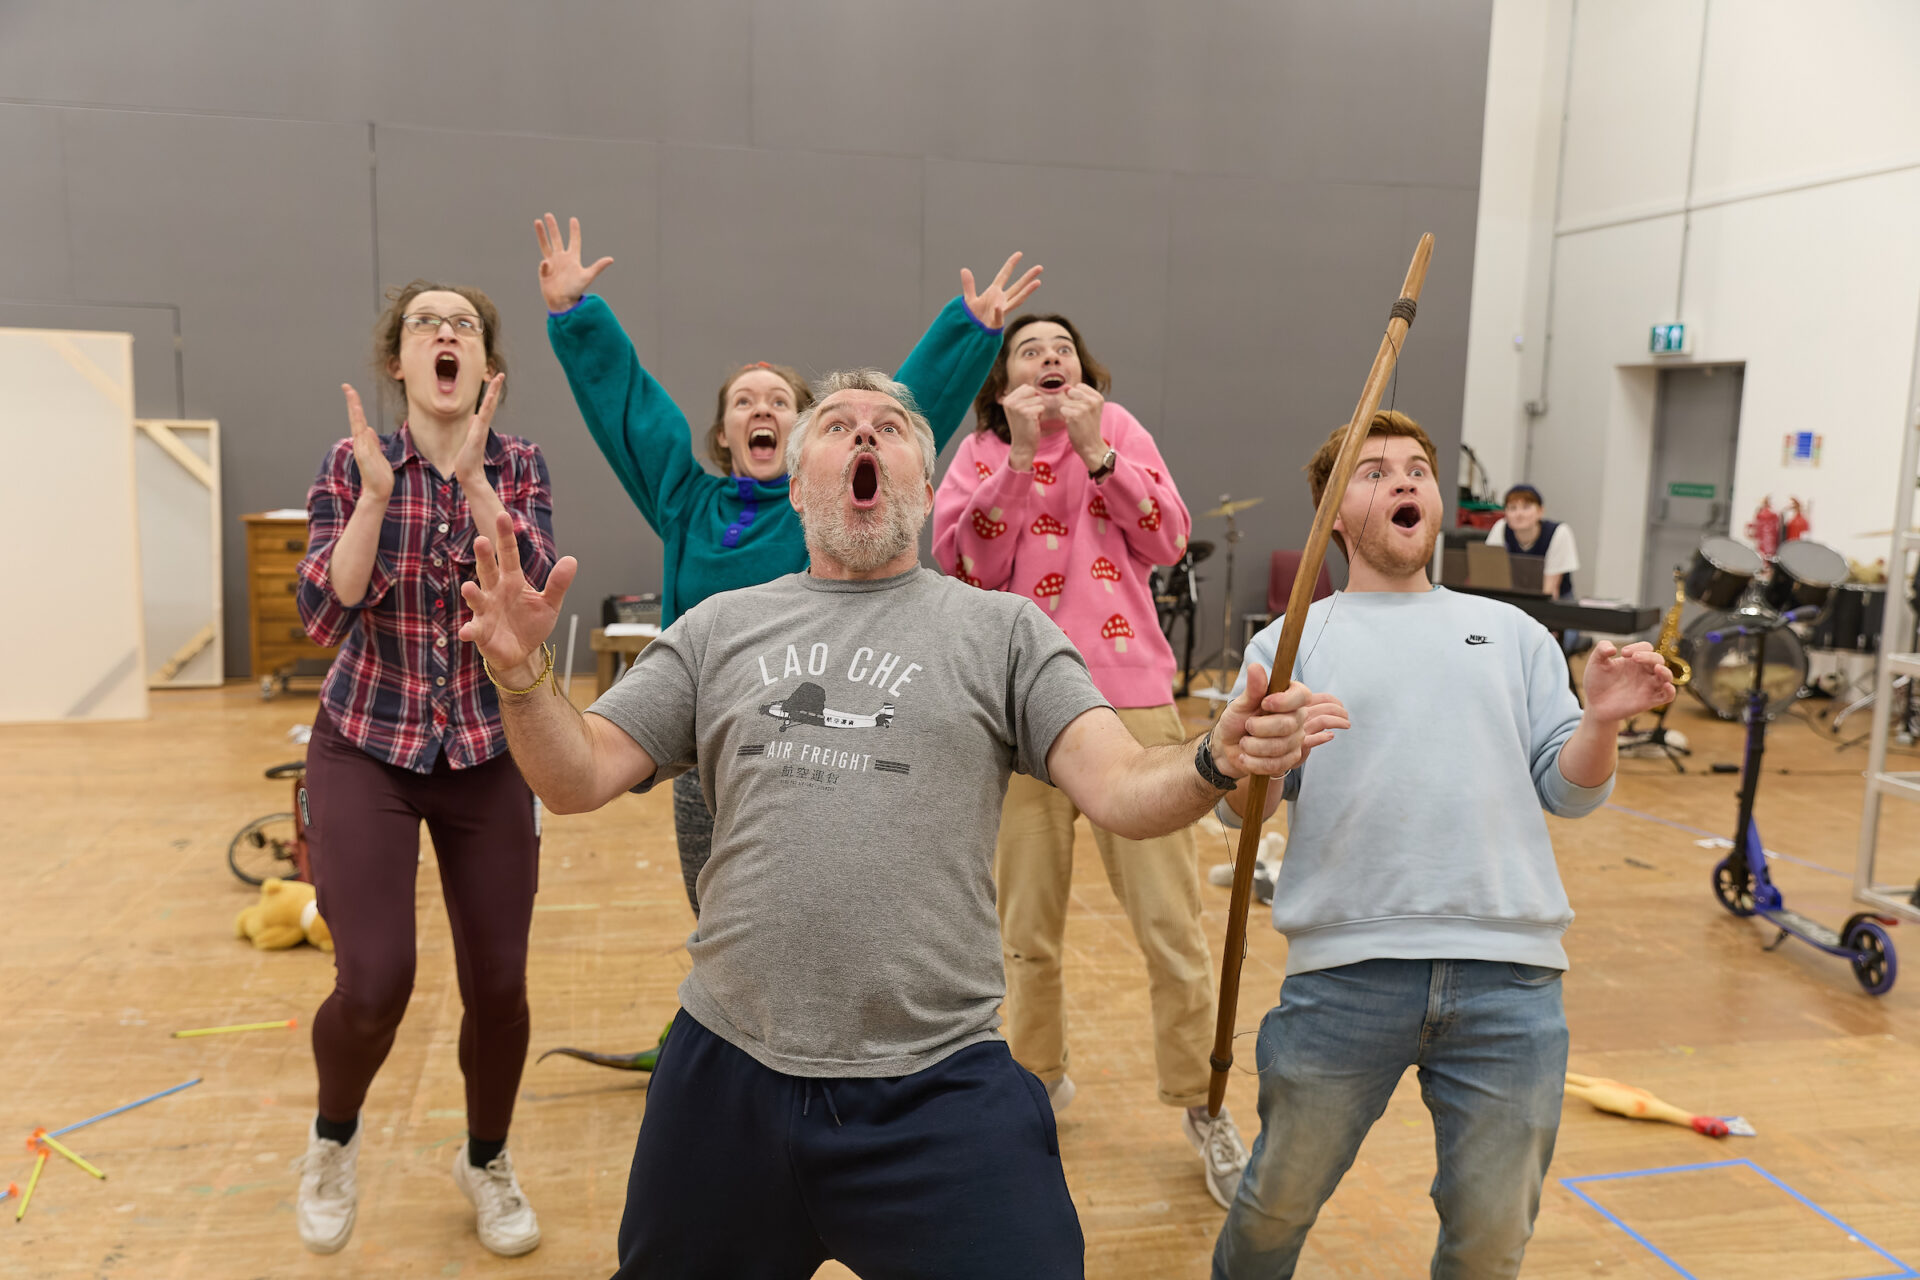 Lynwen Haf Roberts (Nibs), Rebecca Killick (Tiger / Nana / Slightly), Keiron Self (Mr Darling / Smee / Tootles), Edward Lee (Apprentice Actor) and Owen Alun (Tink / Skylights) in Peter Pan rehearsals (c) Mark Douet